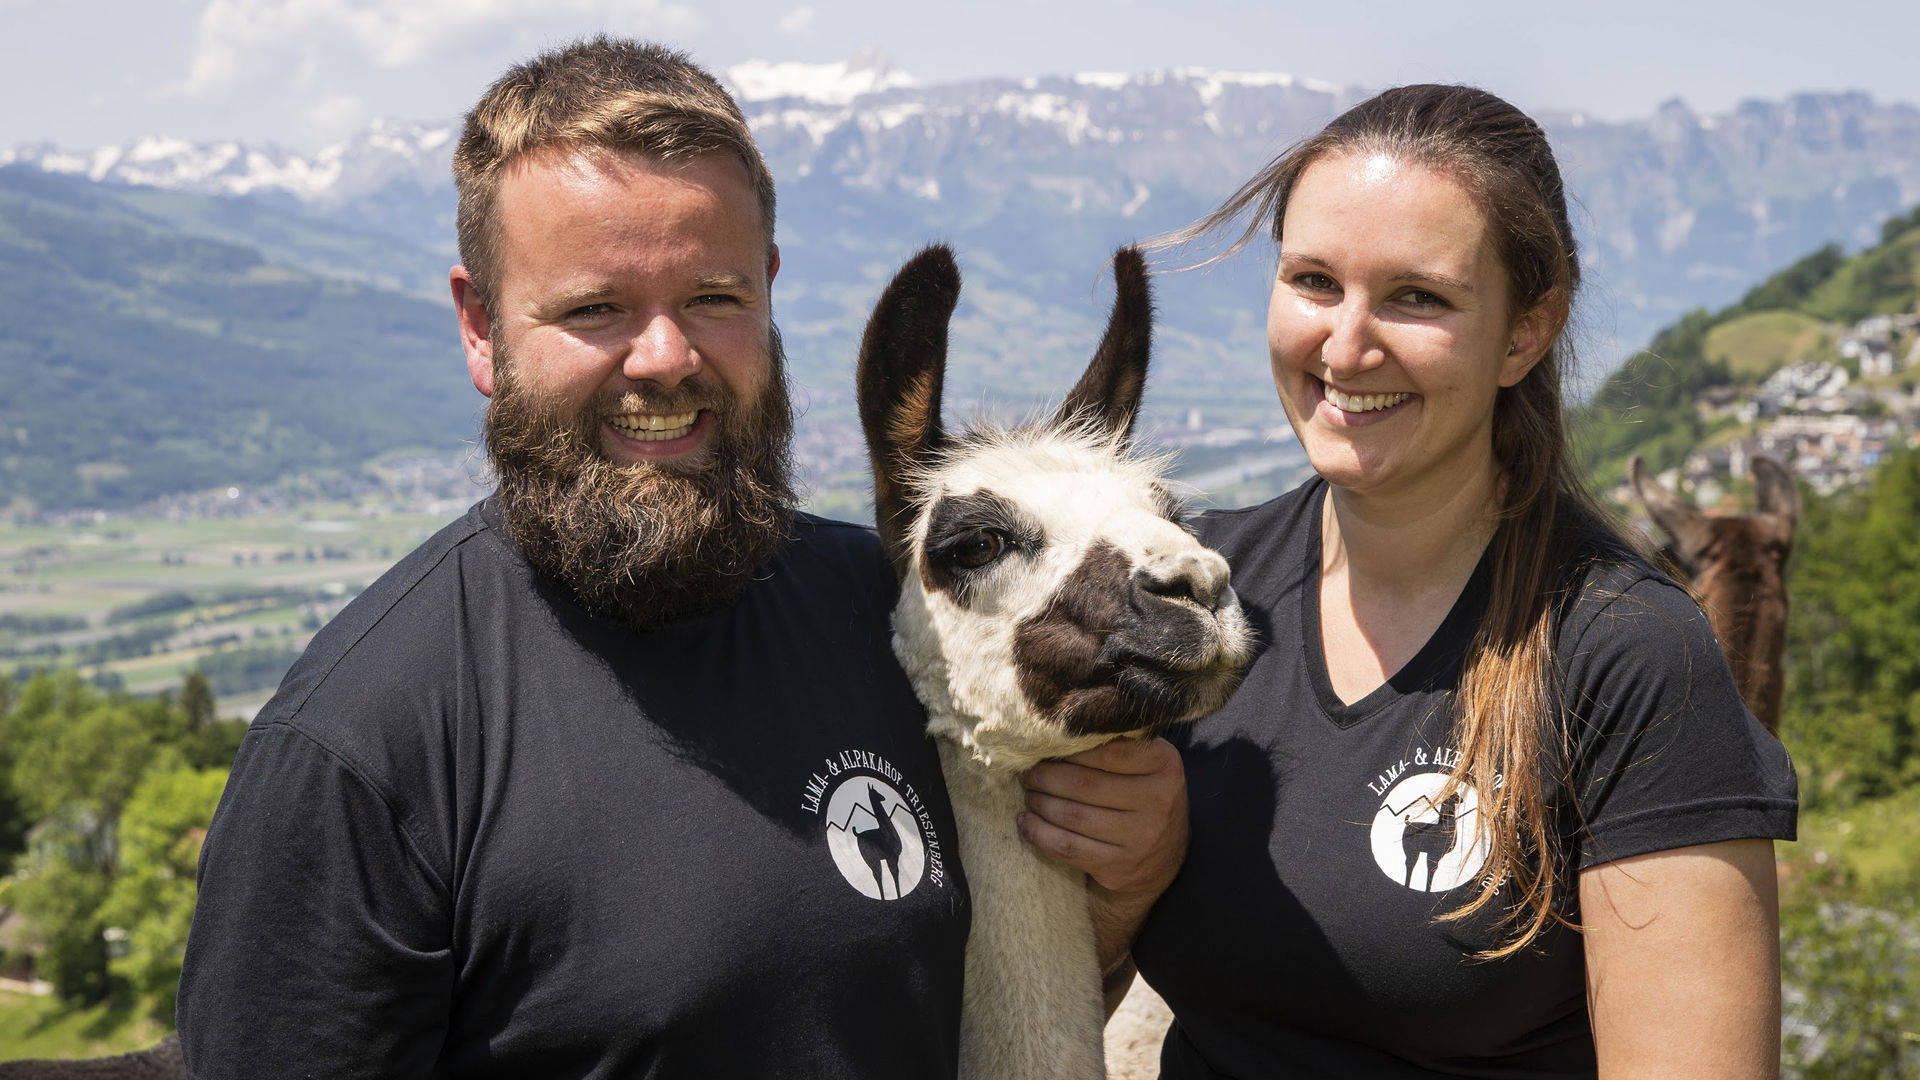 Marc Schädler and Anna-Lena Beck with a Lama